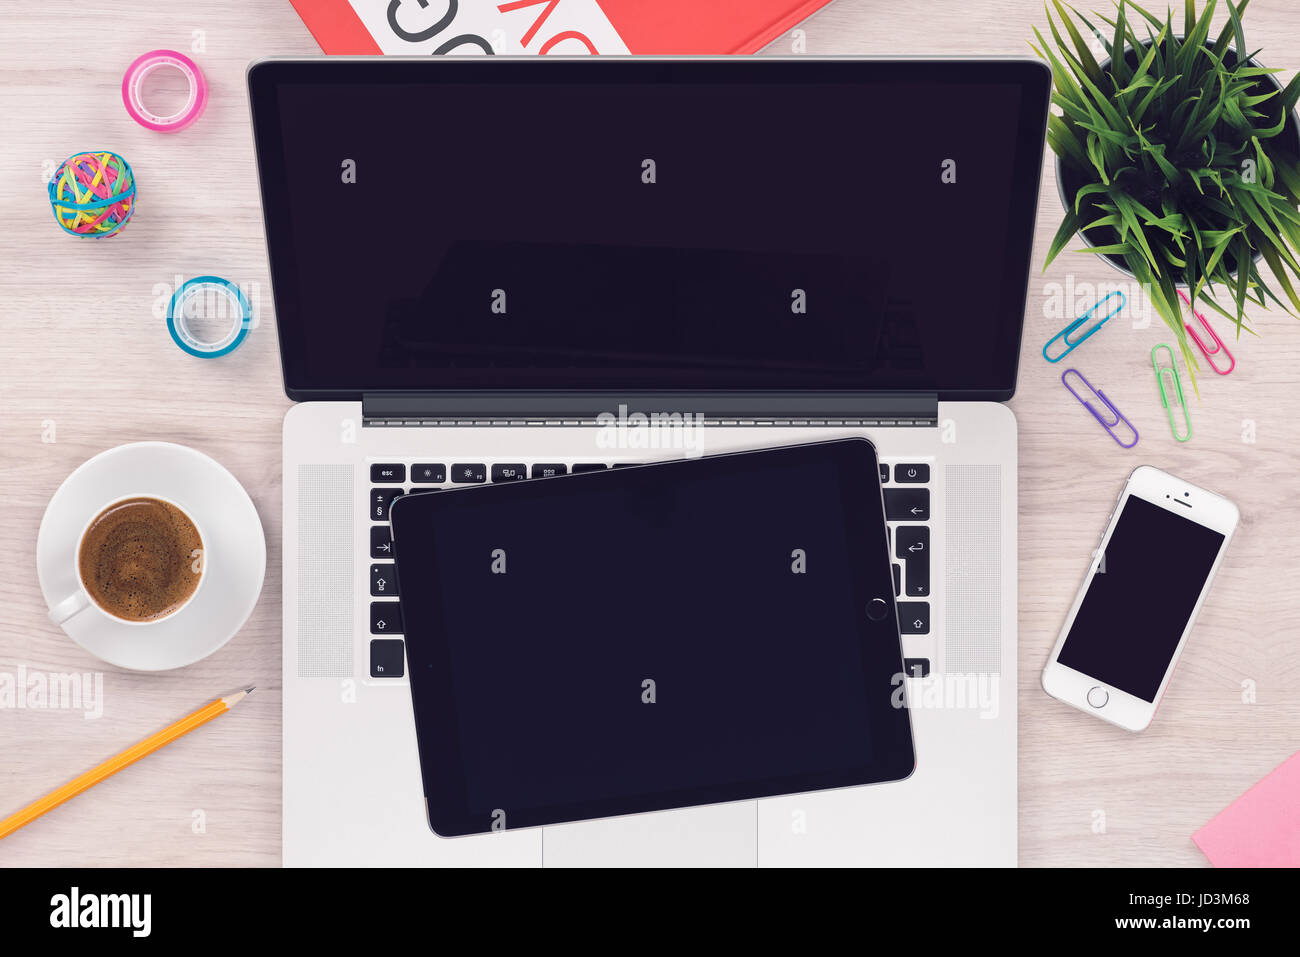 Top view flat lay workspace mockup with open laptop tablet pc and smartphone on office wooden desk Stock Photo